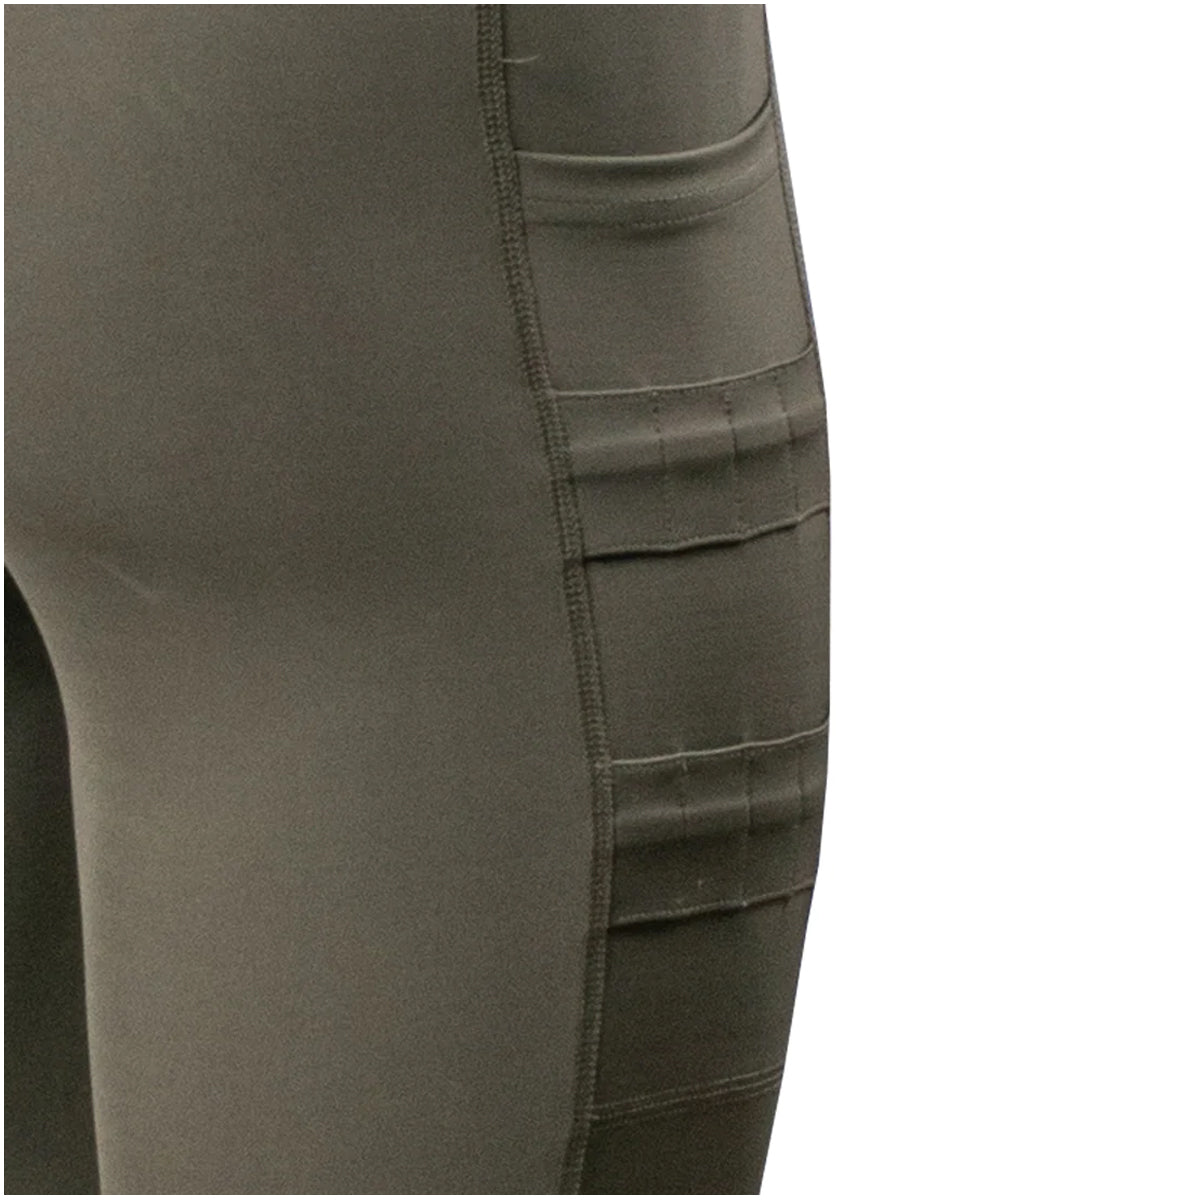 Grunt Style Women's 7/8 Cropped Fitness Leggings - Military Green Grunt Style